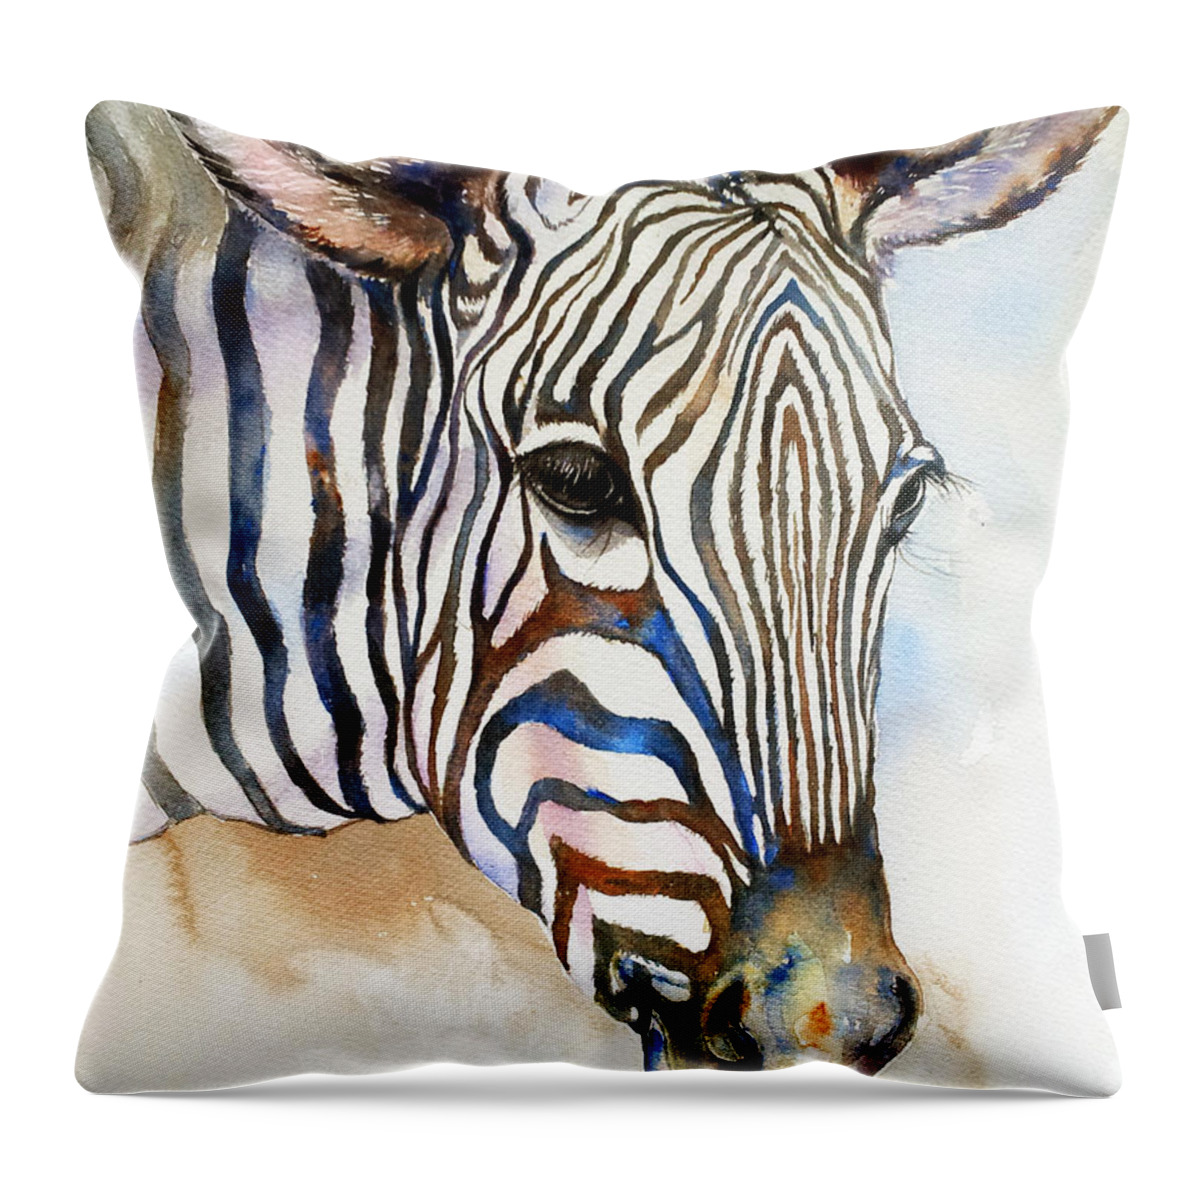 Zebra Throw Pillow featuring the painting Earth and Sky_Zebra Portrait by Arti Chauhan